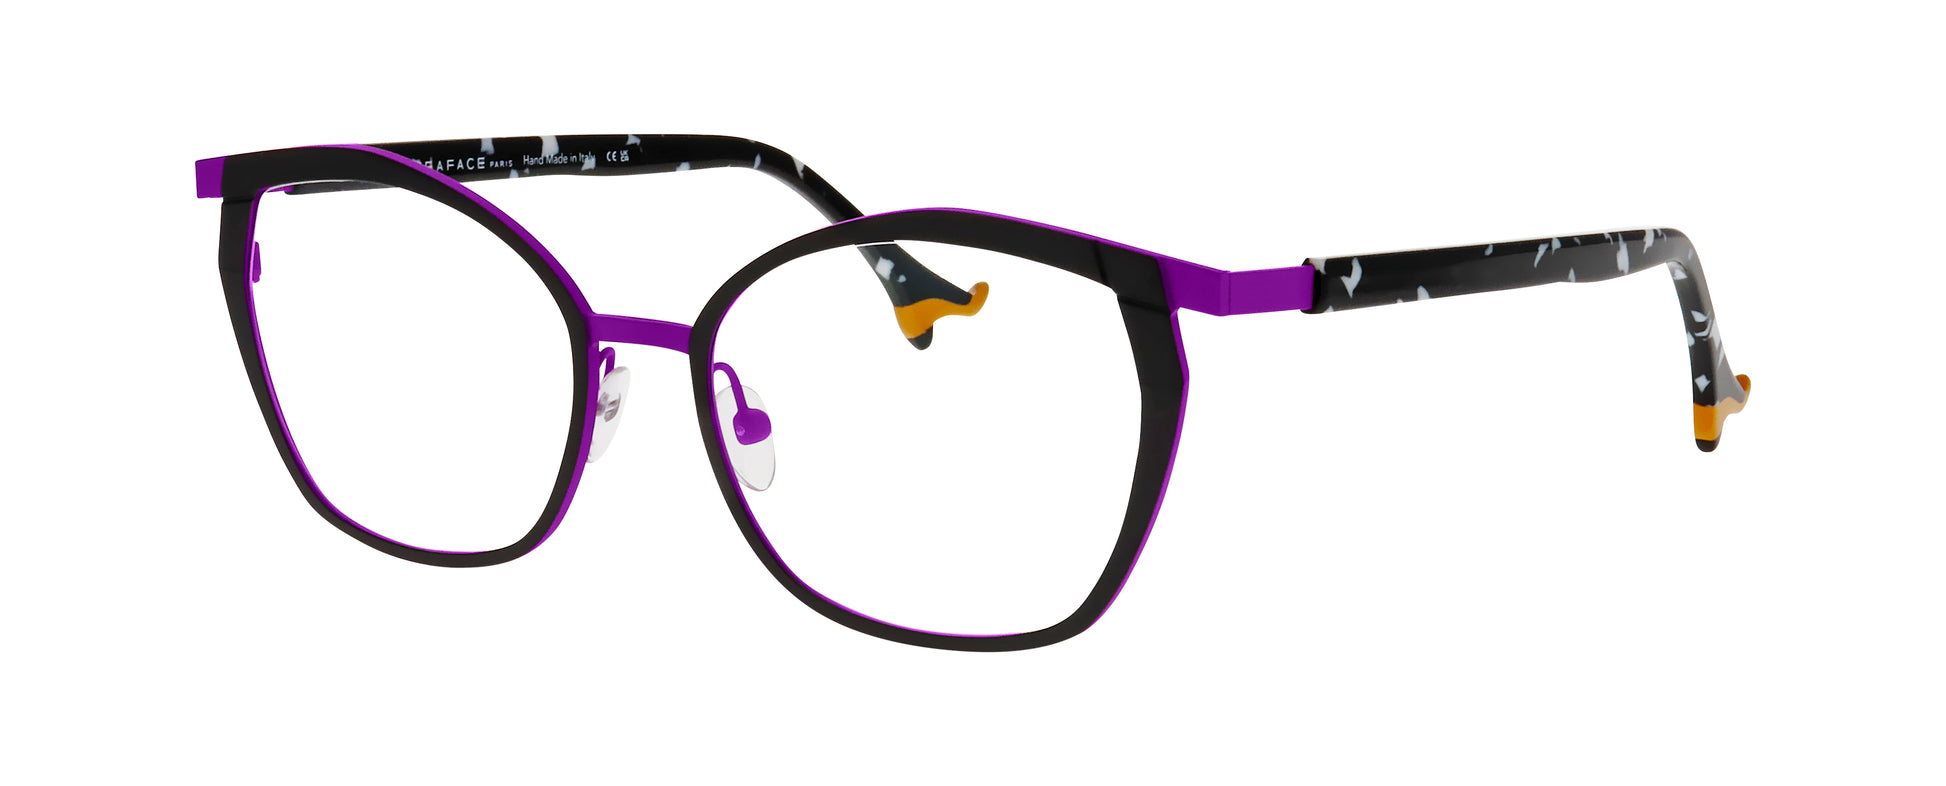 Women's prescription eyewear – A partial side view of an oval titanium frame that is black and purple in colour.  The black and white speckled temples are finished with orange ladies’ shoe tips